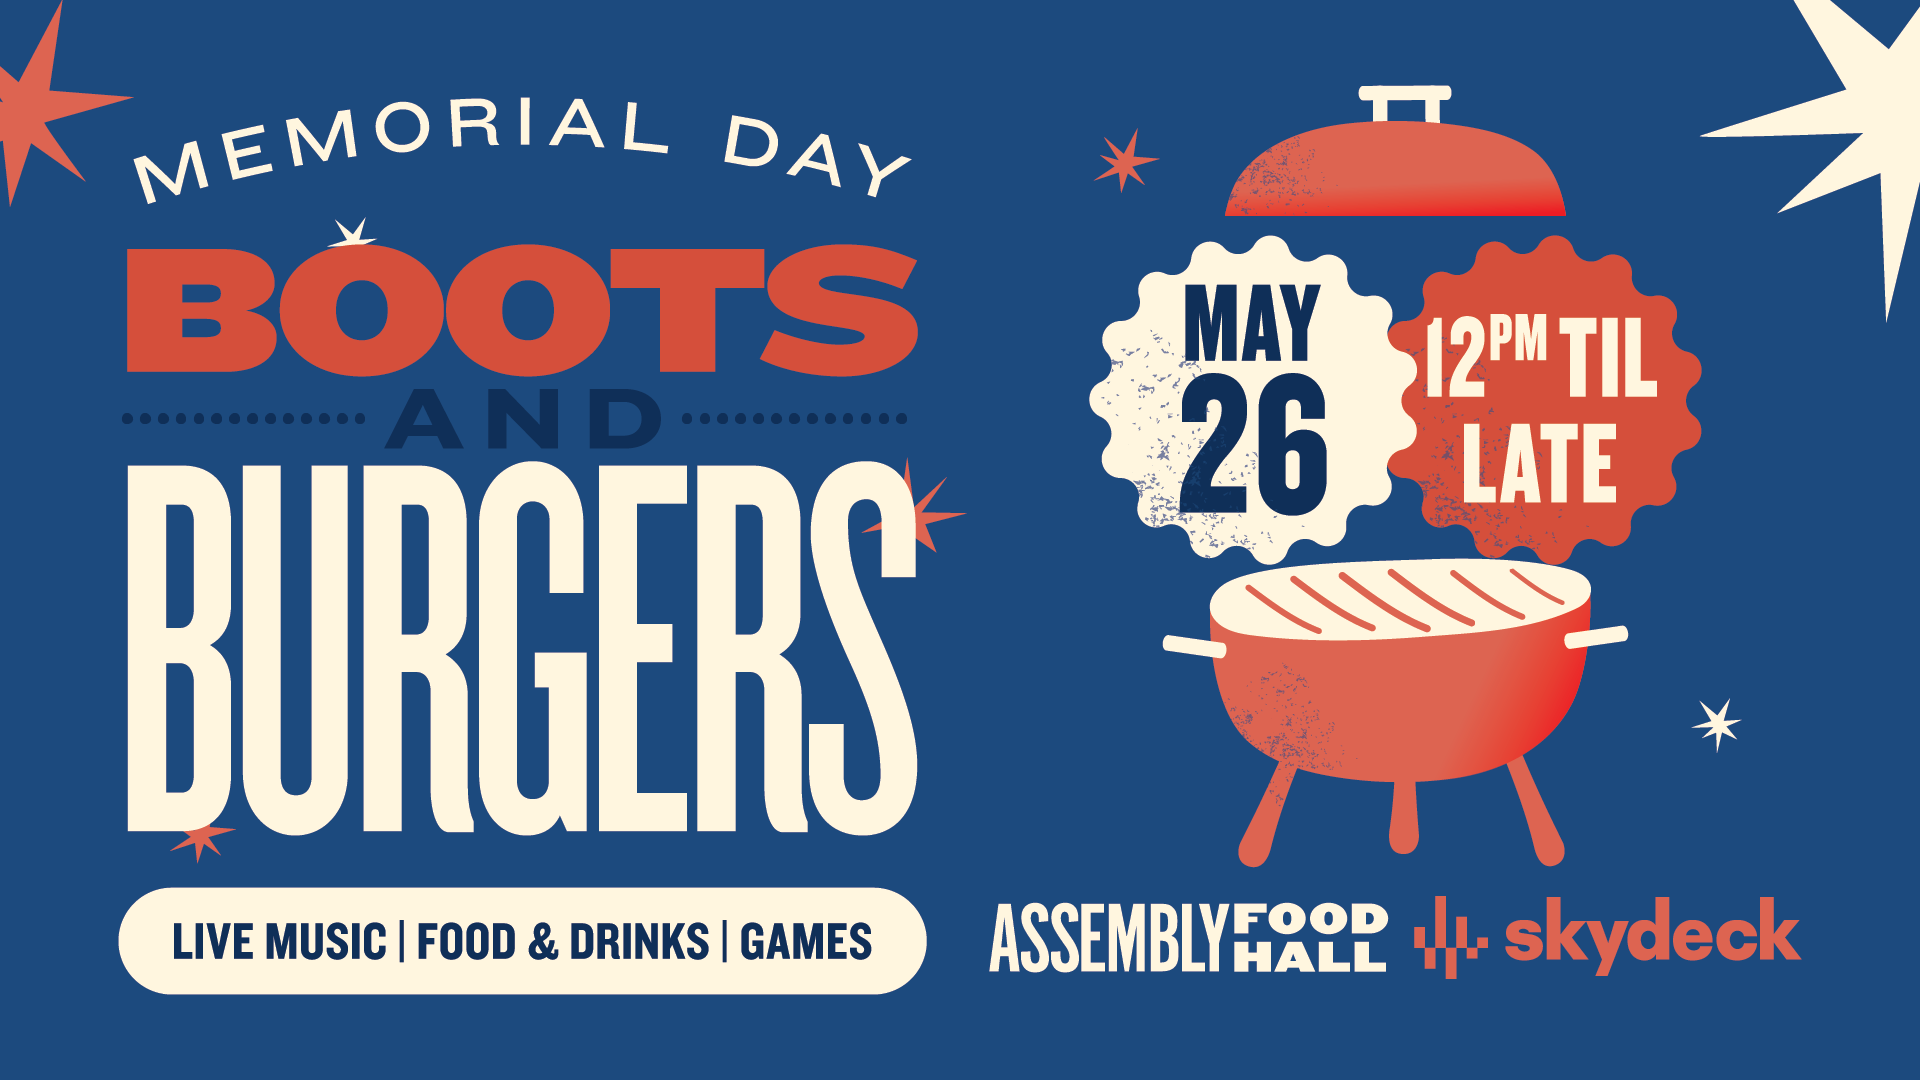 Memorial Day Boots & Burgers 